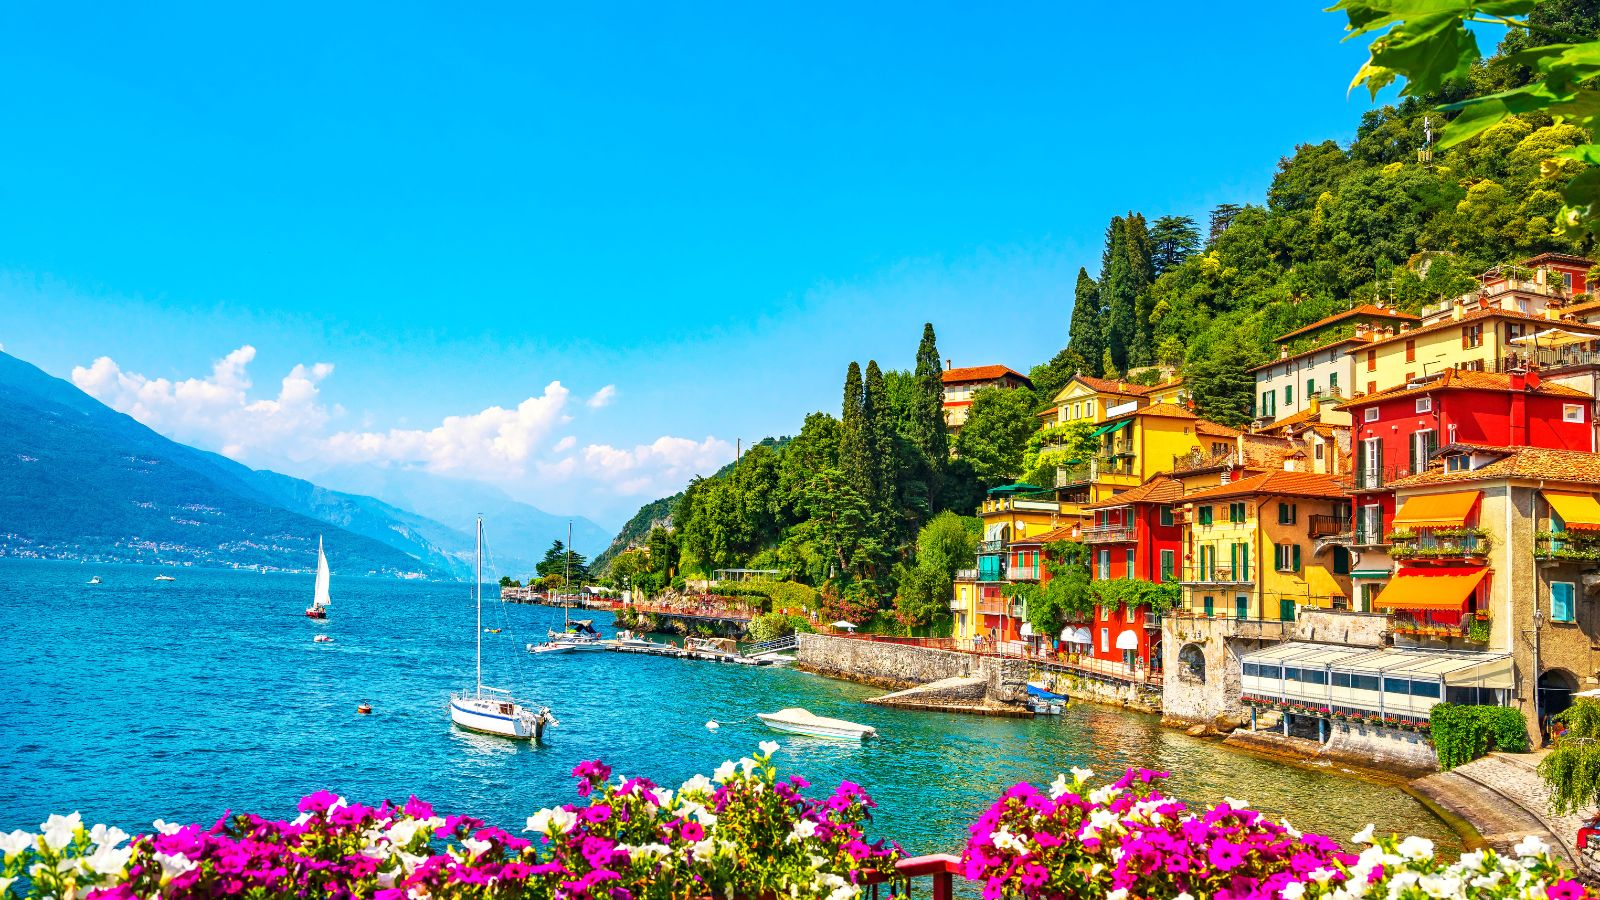 <p>If you decide to head to Lake Como, you’ll want to visit Bellagio, Varenna, and Como. These towns are all unique and have stunning views of the lake. You can enjoy activities such as boating on the lake or visiting the grand villas and gardens. Lake Como is a great place to relax thanks to its Alpine views. </p>